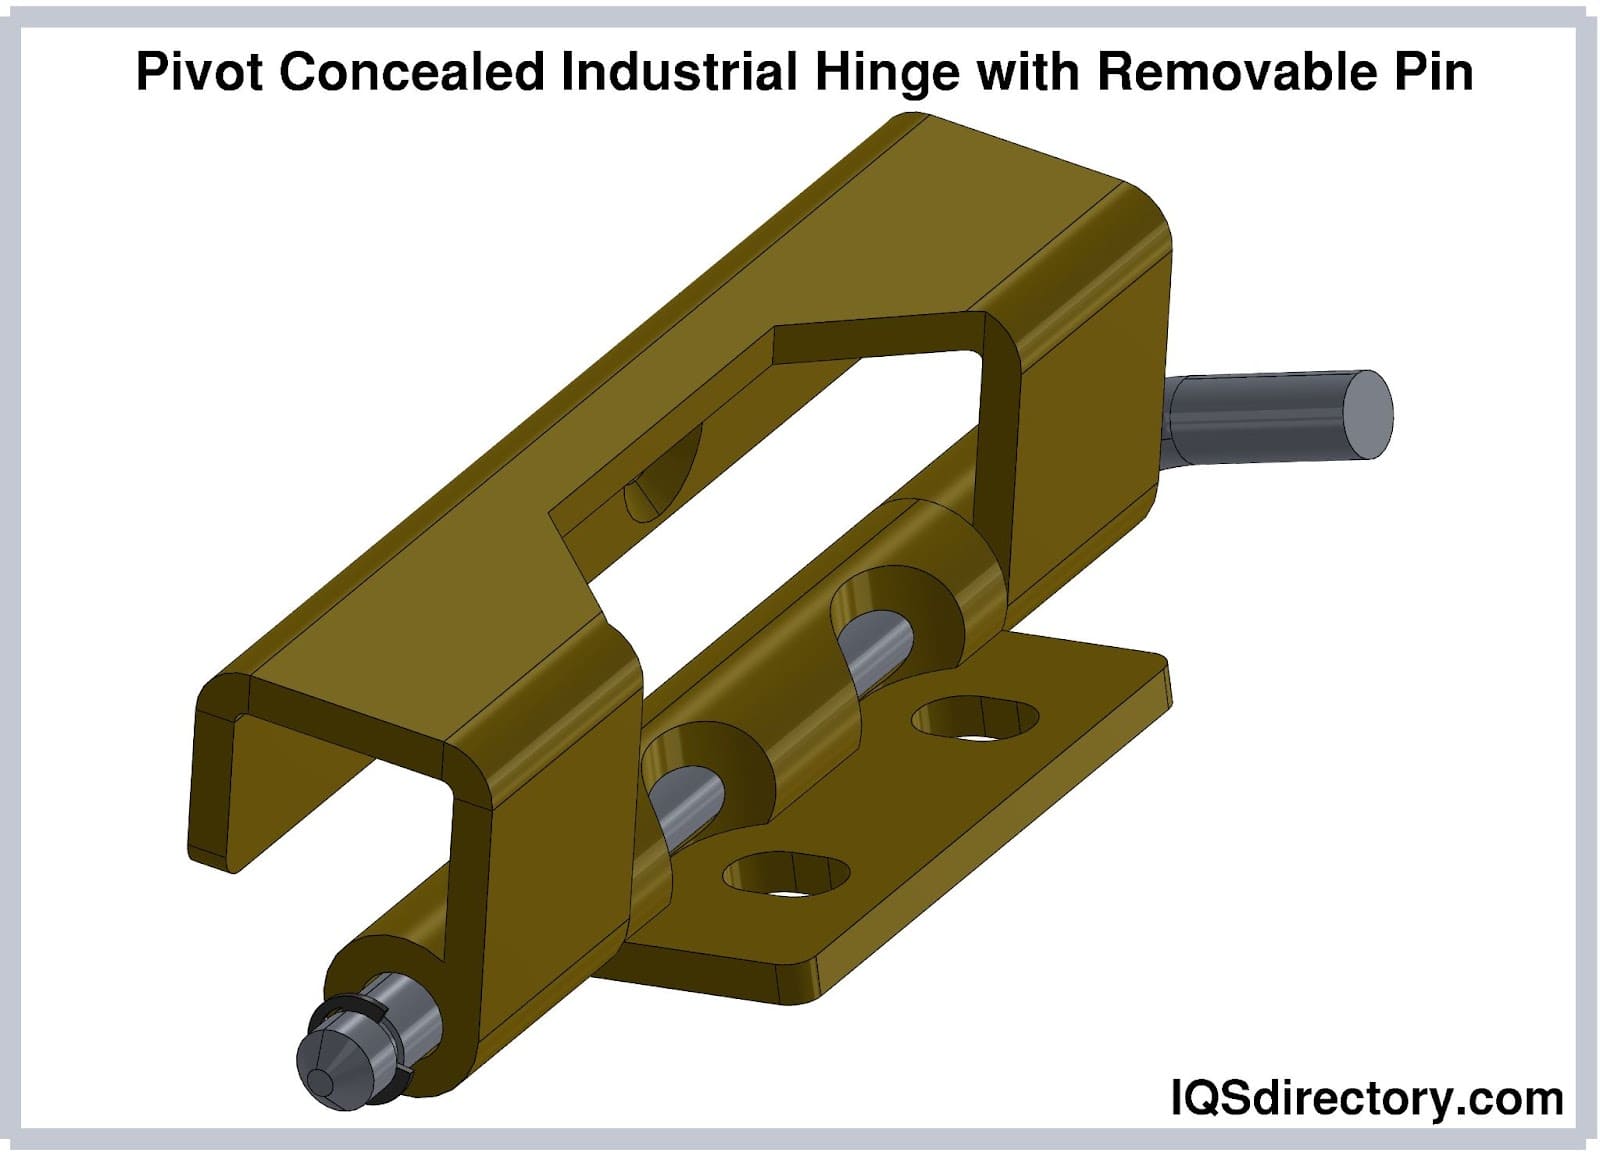 Pivot Concealed Industrial Hinge with Removable Pin